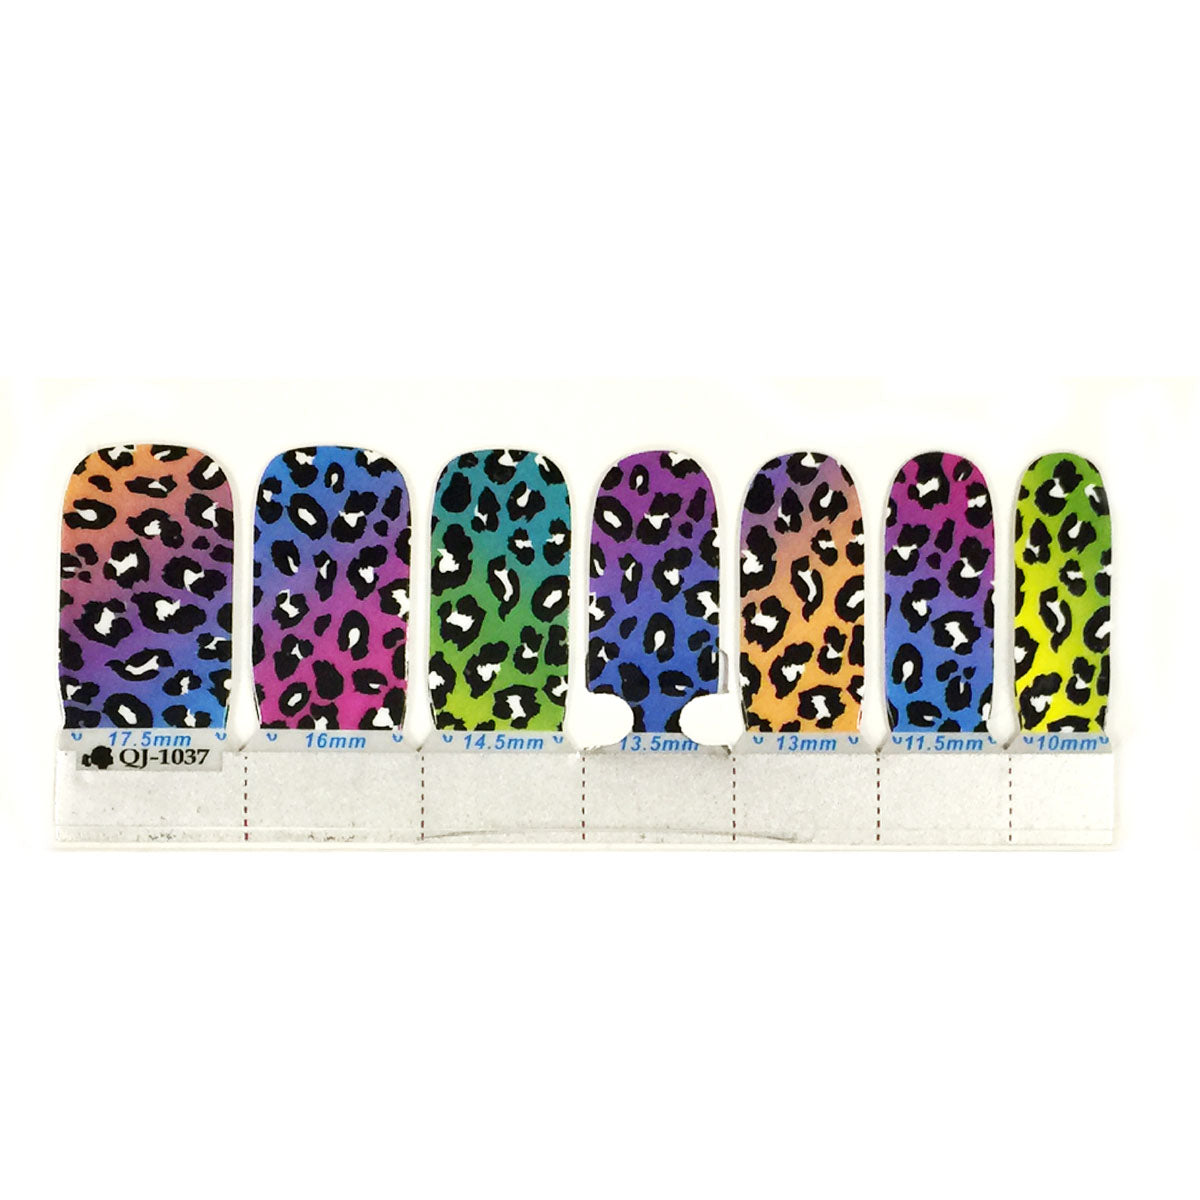 Wrapables Decorative Nail Art Decal Stickers